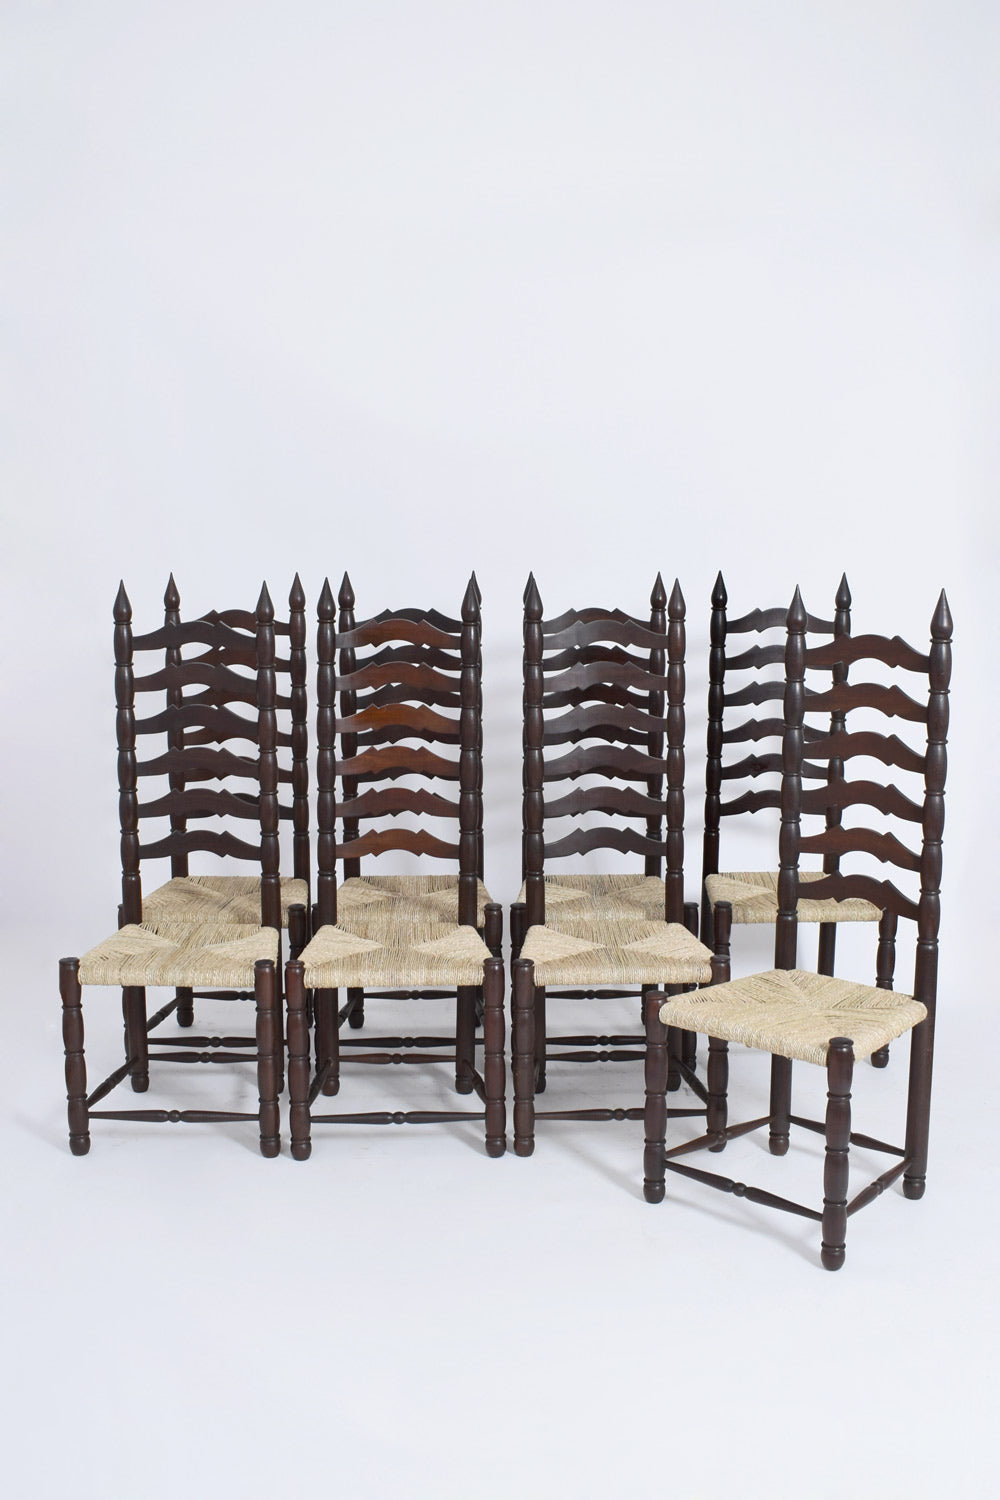 Set of 8 high back chairs, 1950s.